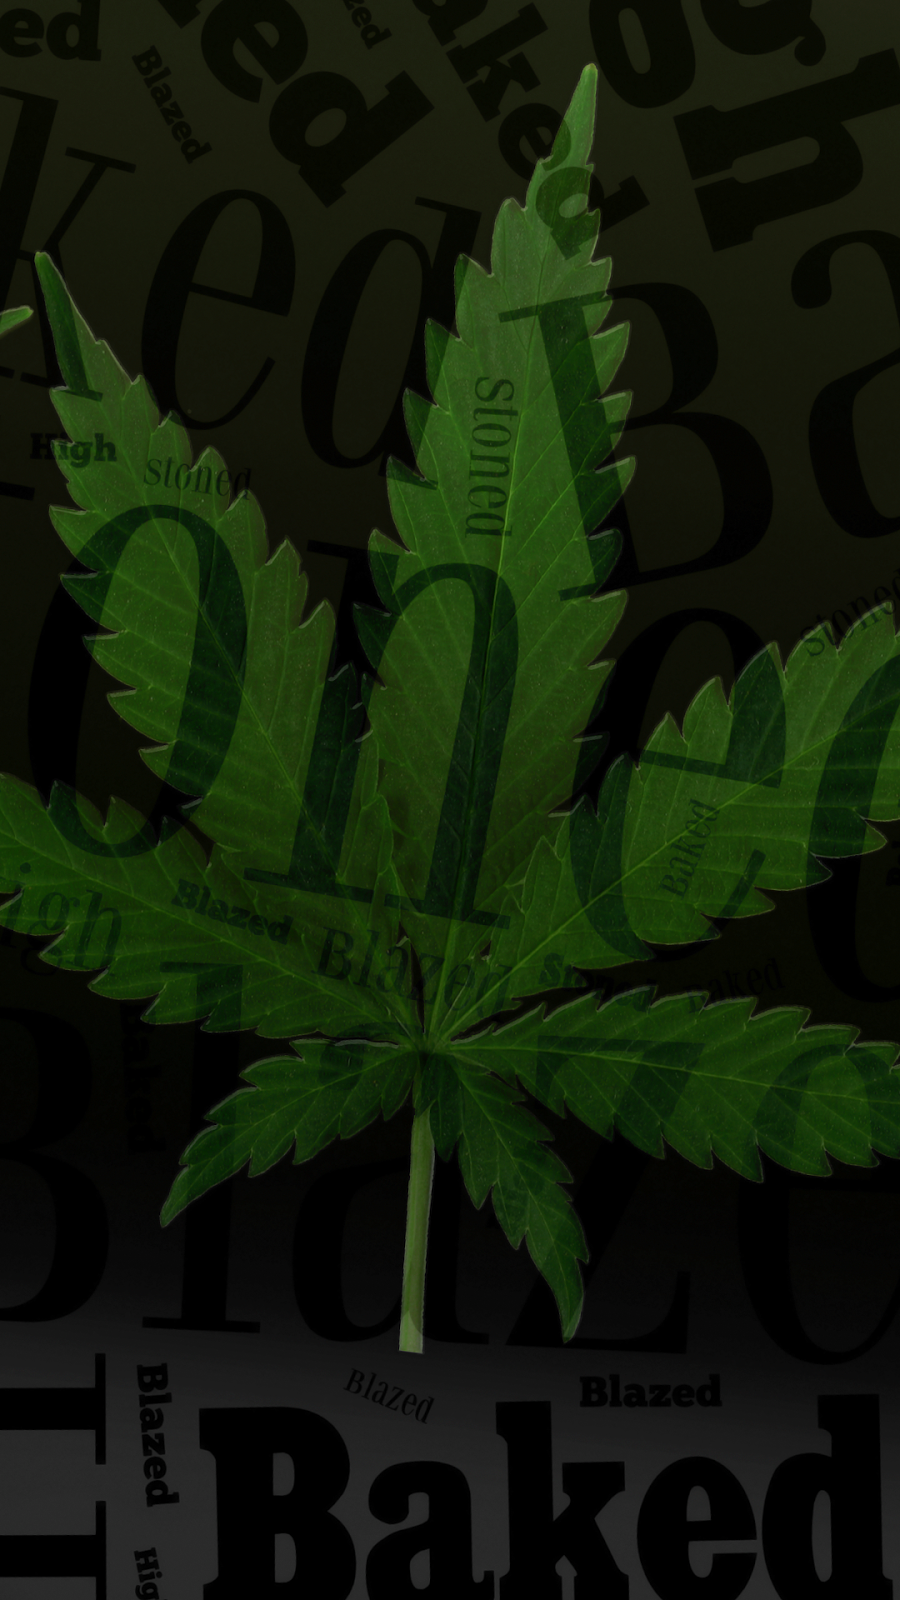 1,095 Weed Wallpaper Stock Video Footage - 4K and HD Video Clips |  Shutterstock